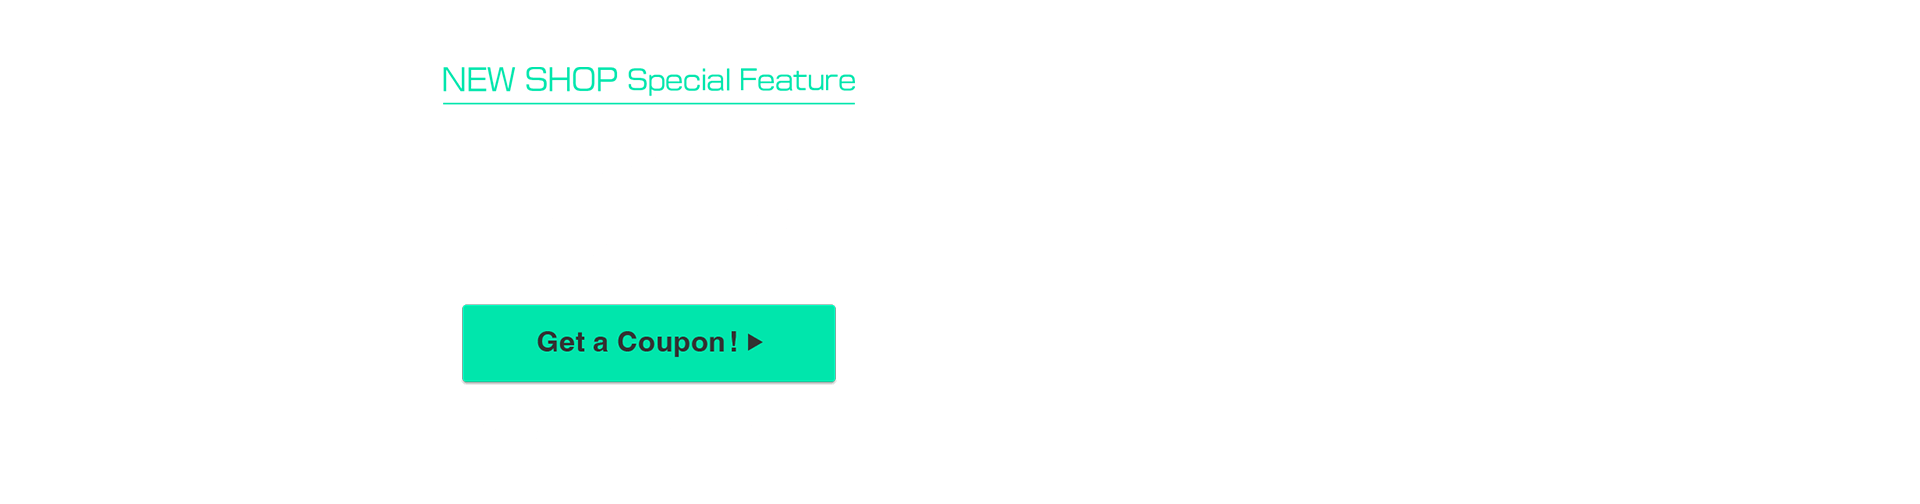 NEW SHOPS Special Feature Buyee fees are FREE for a limited time!